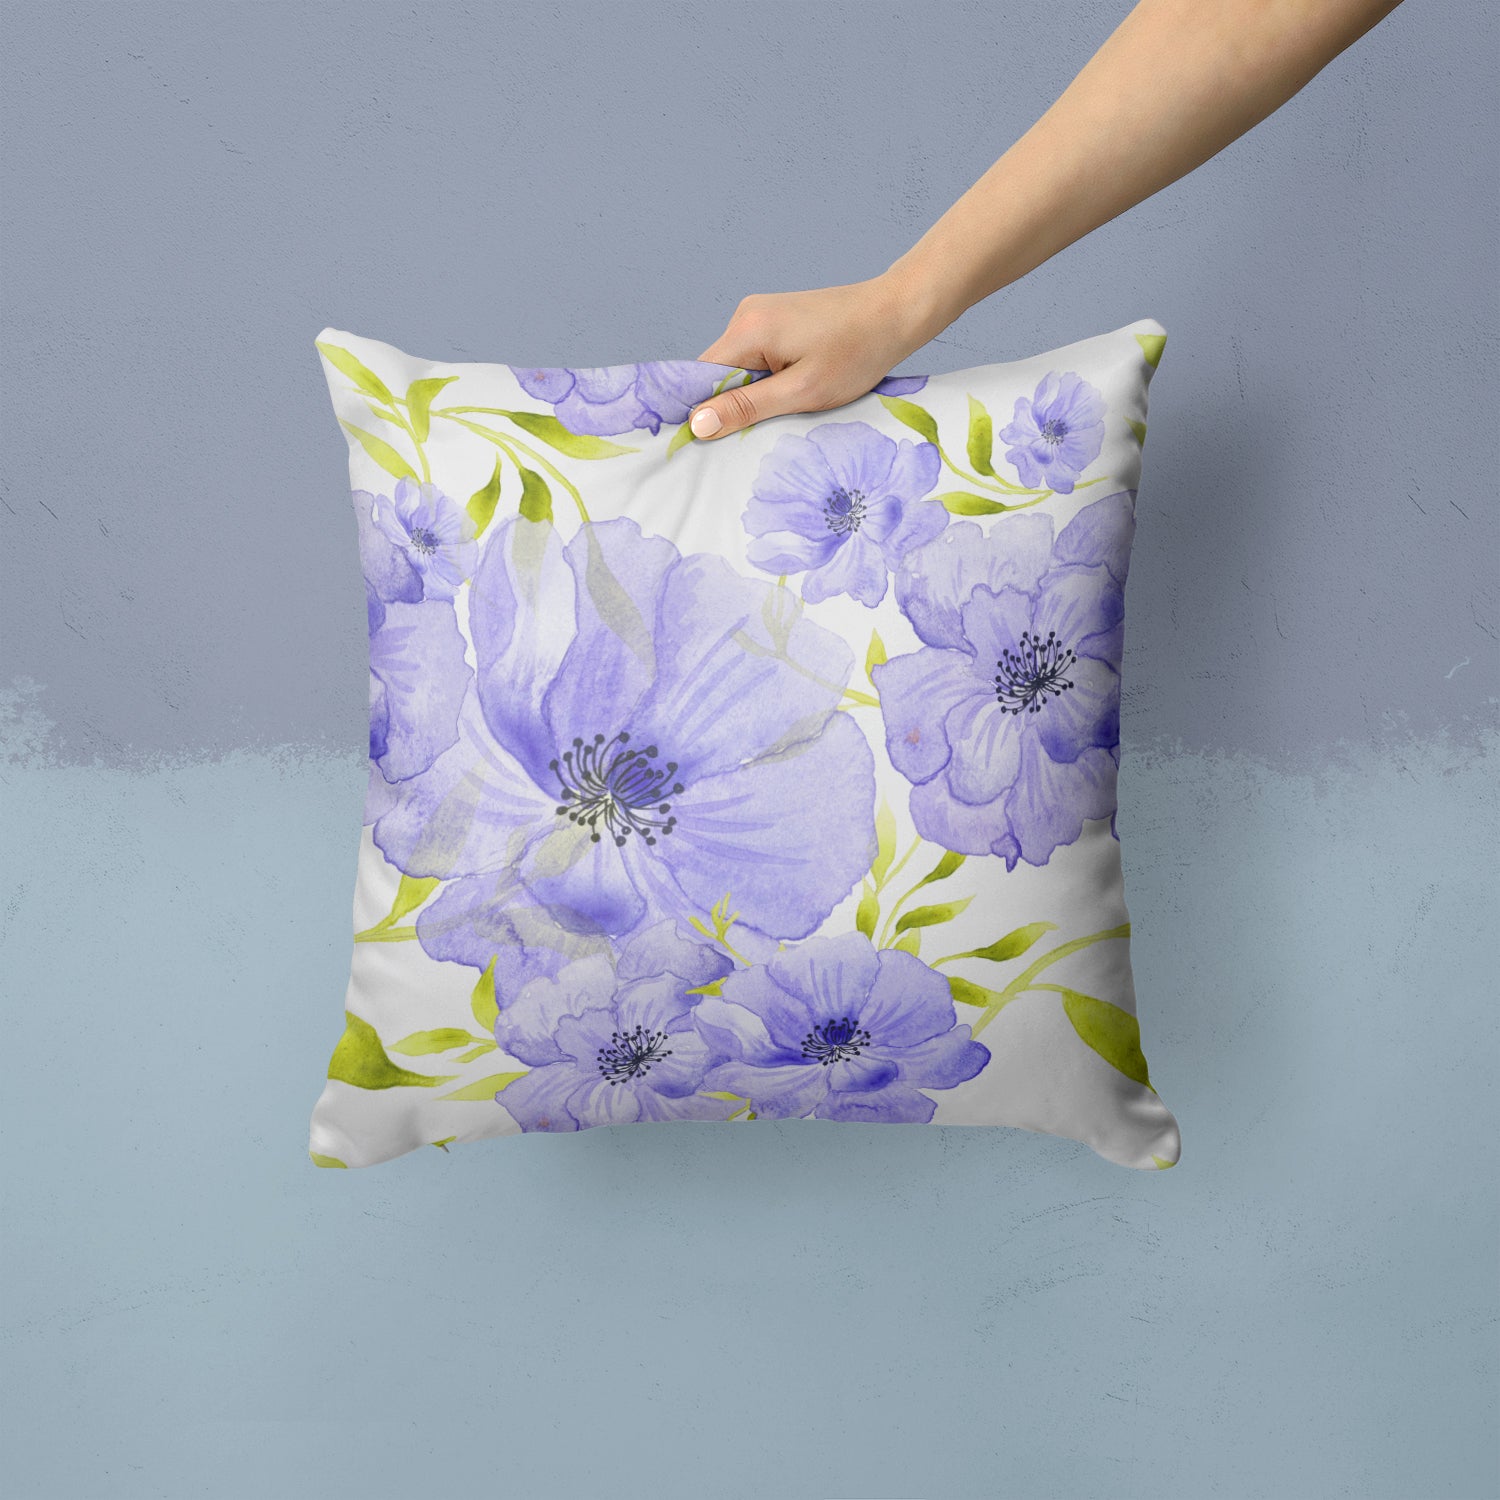 Watercolor Blue Flowers Fabric Decorative Pillow BB7491PW1414 - the-store.com